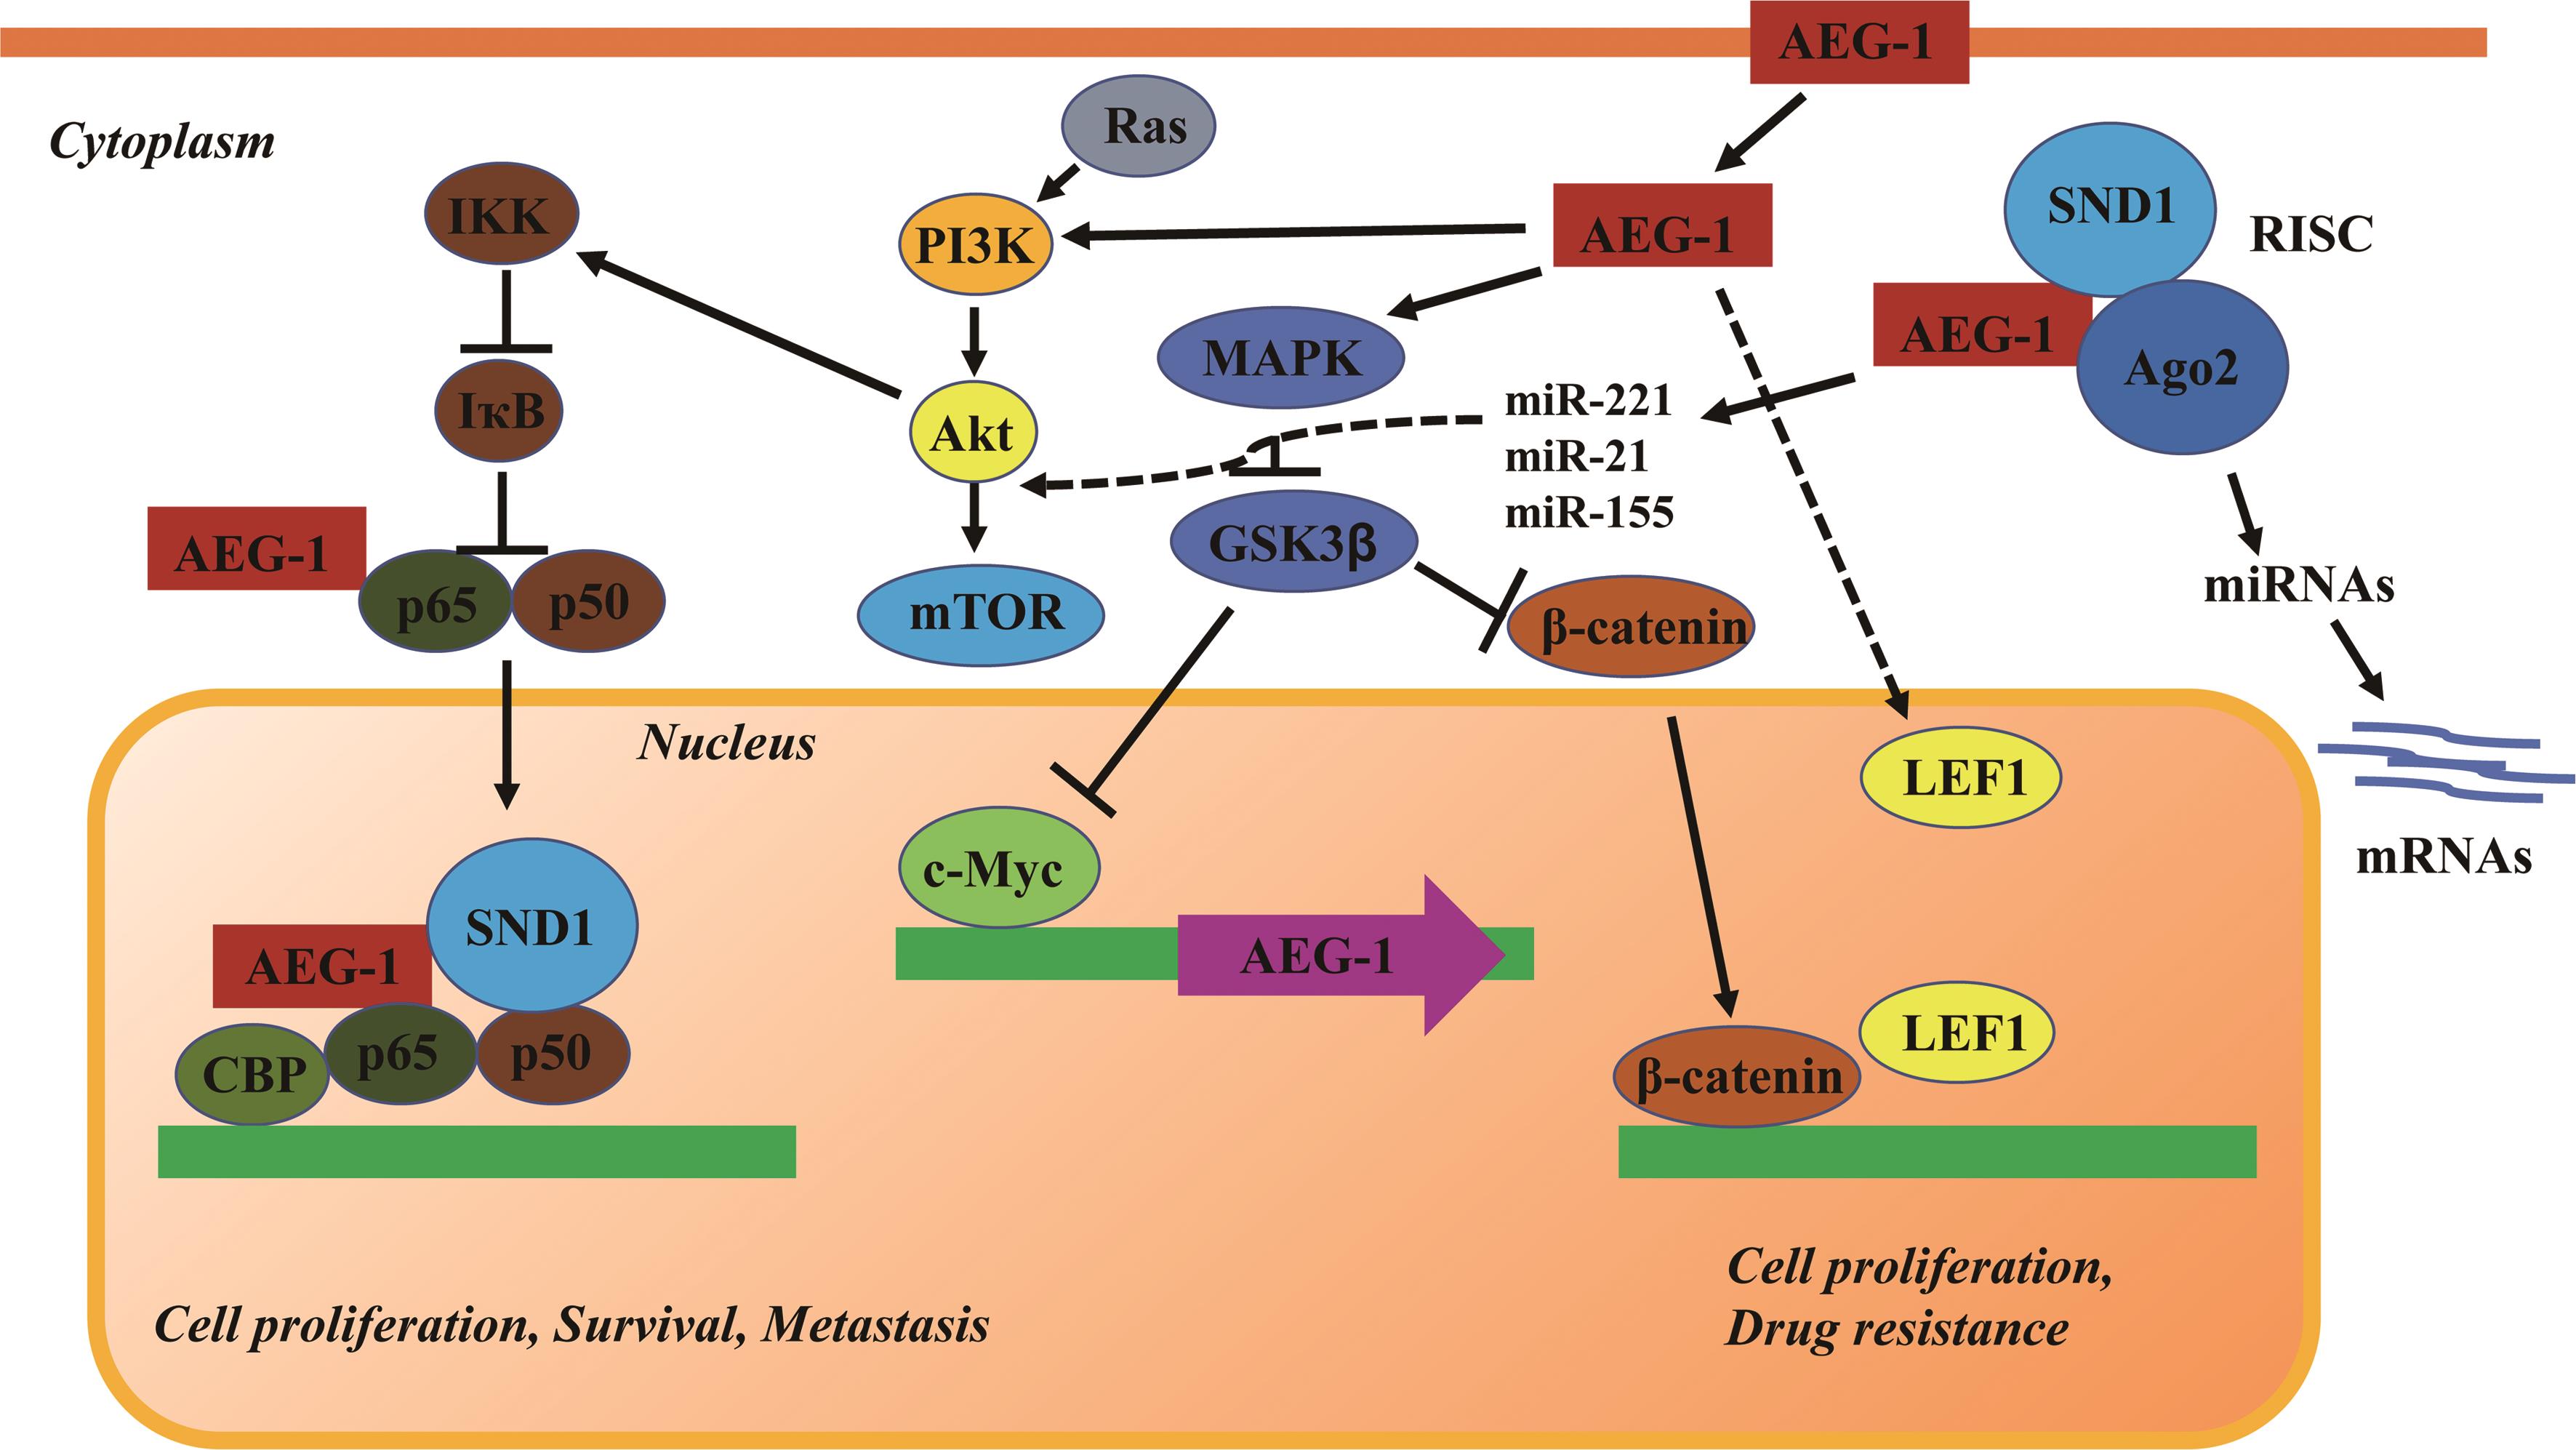 The role of AEG-1, SND1, Ago2 and RISC in HCC development and progression via the crosstalk between multiple signaling pathways.